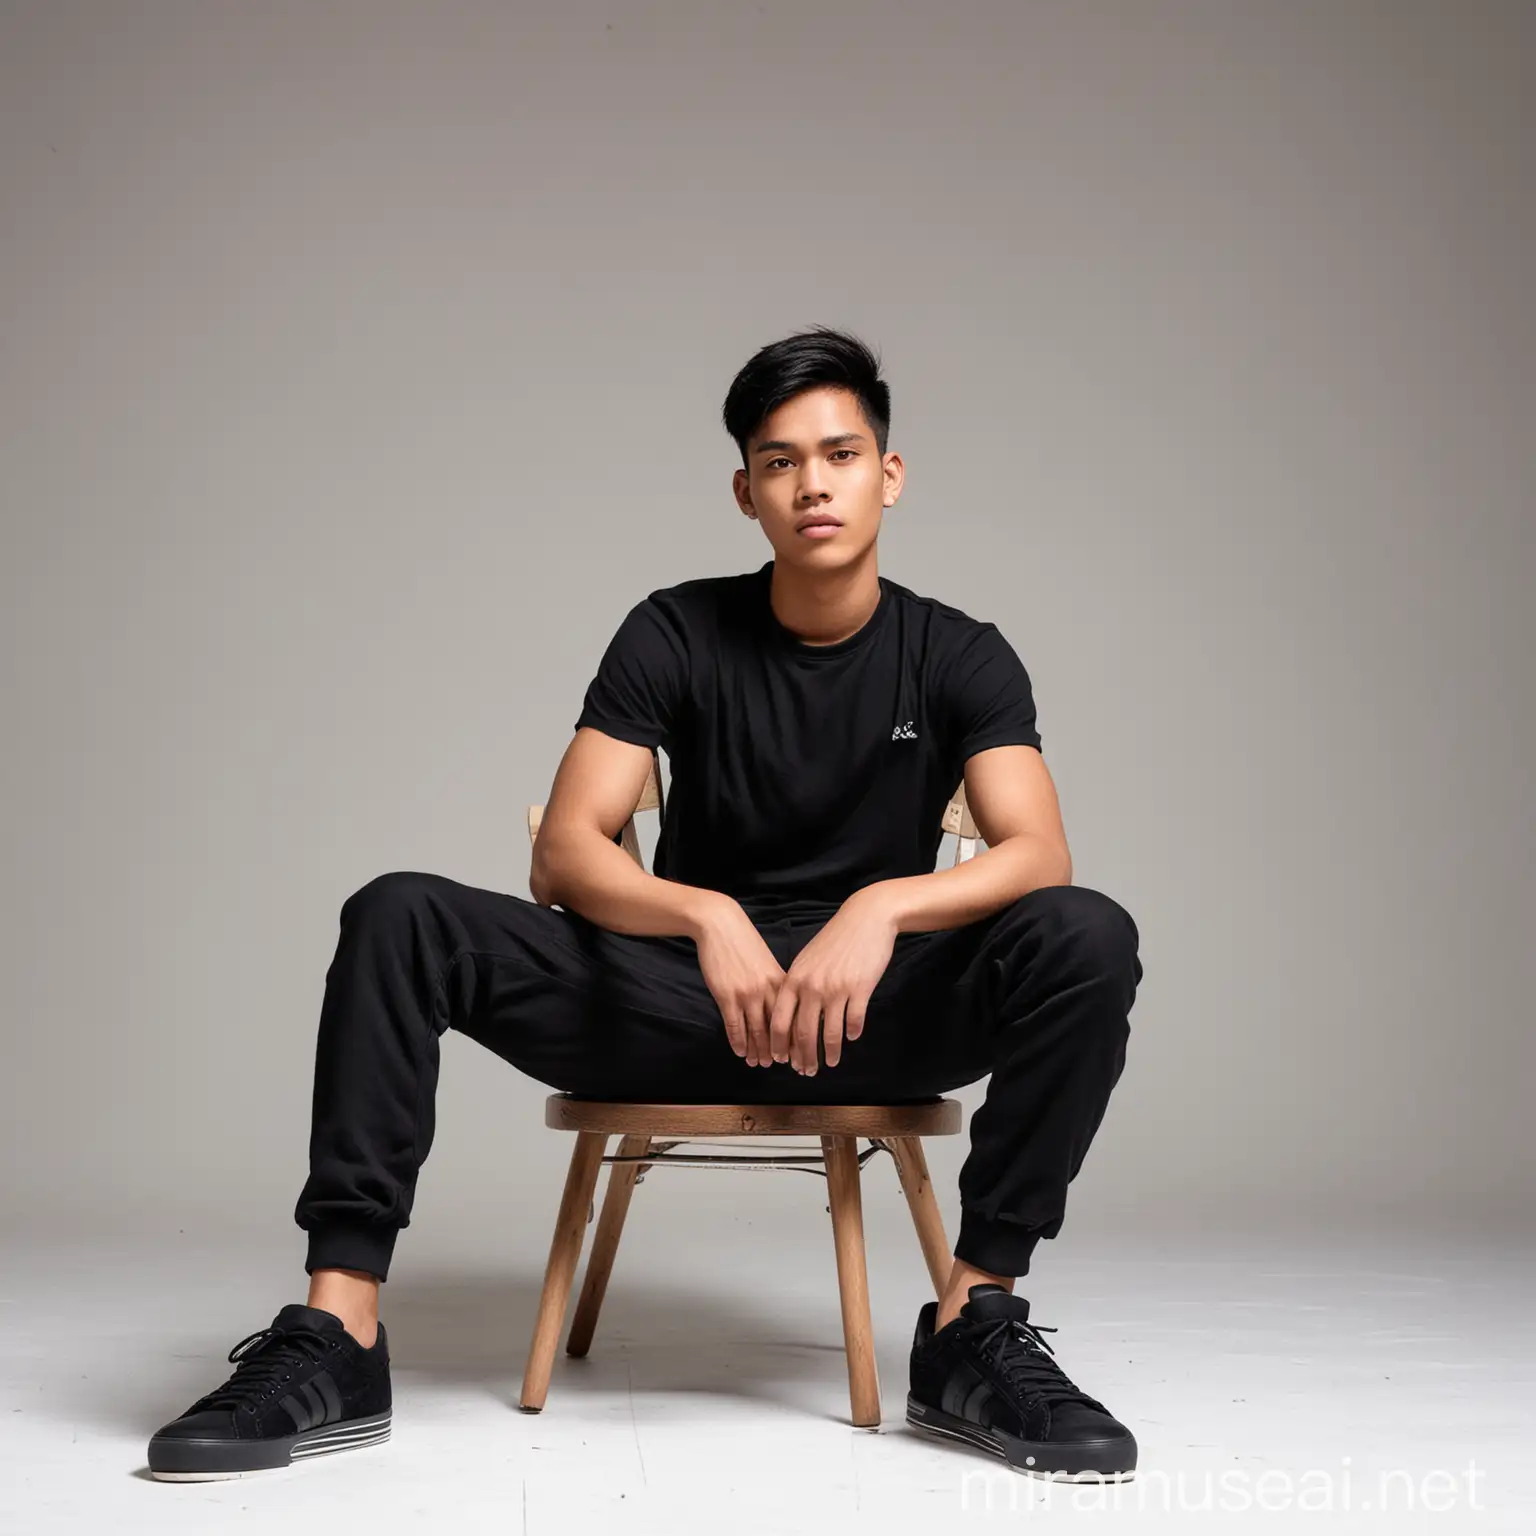 Young Indonesian Male Model in Black Shirt and Sneakers Sitting Sideways on Chair